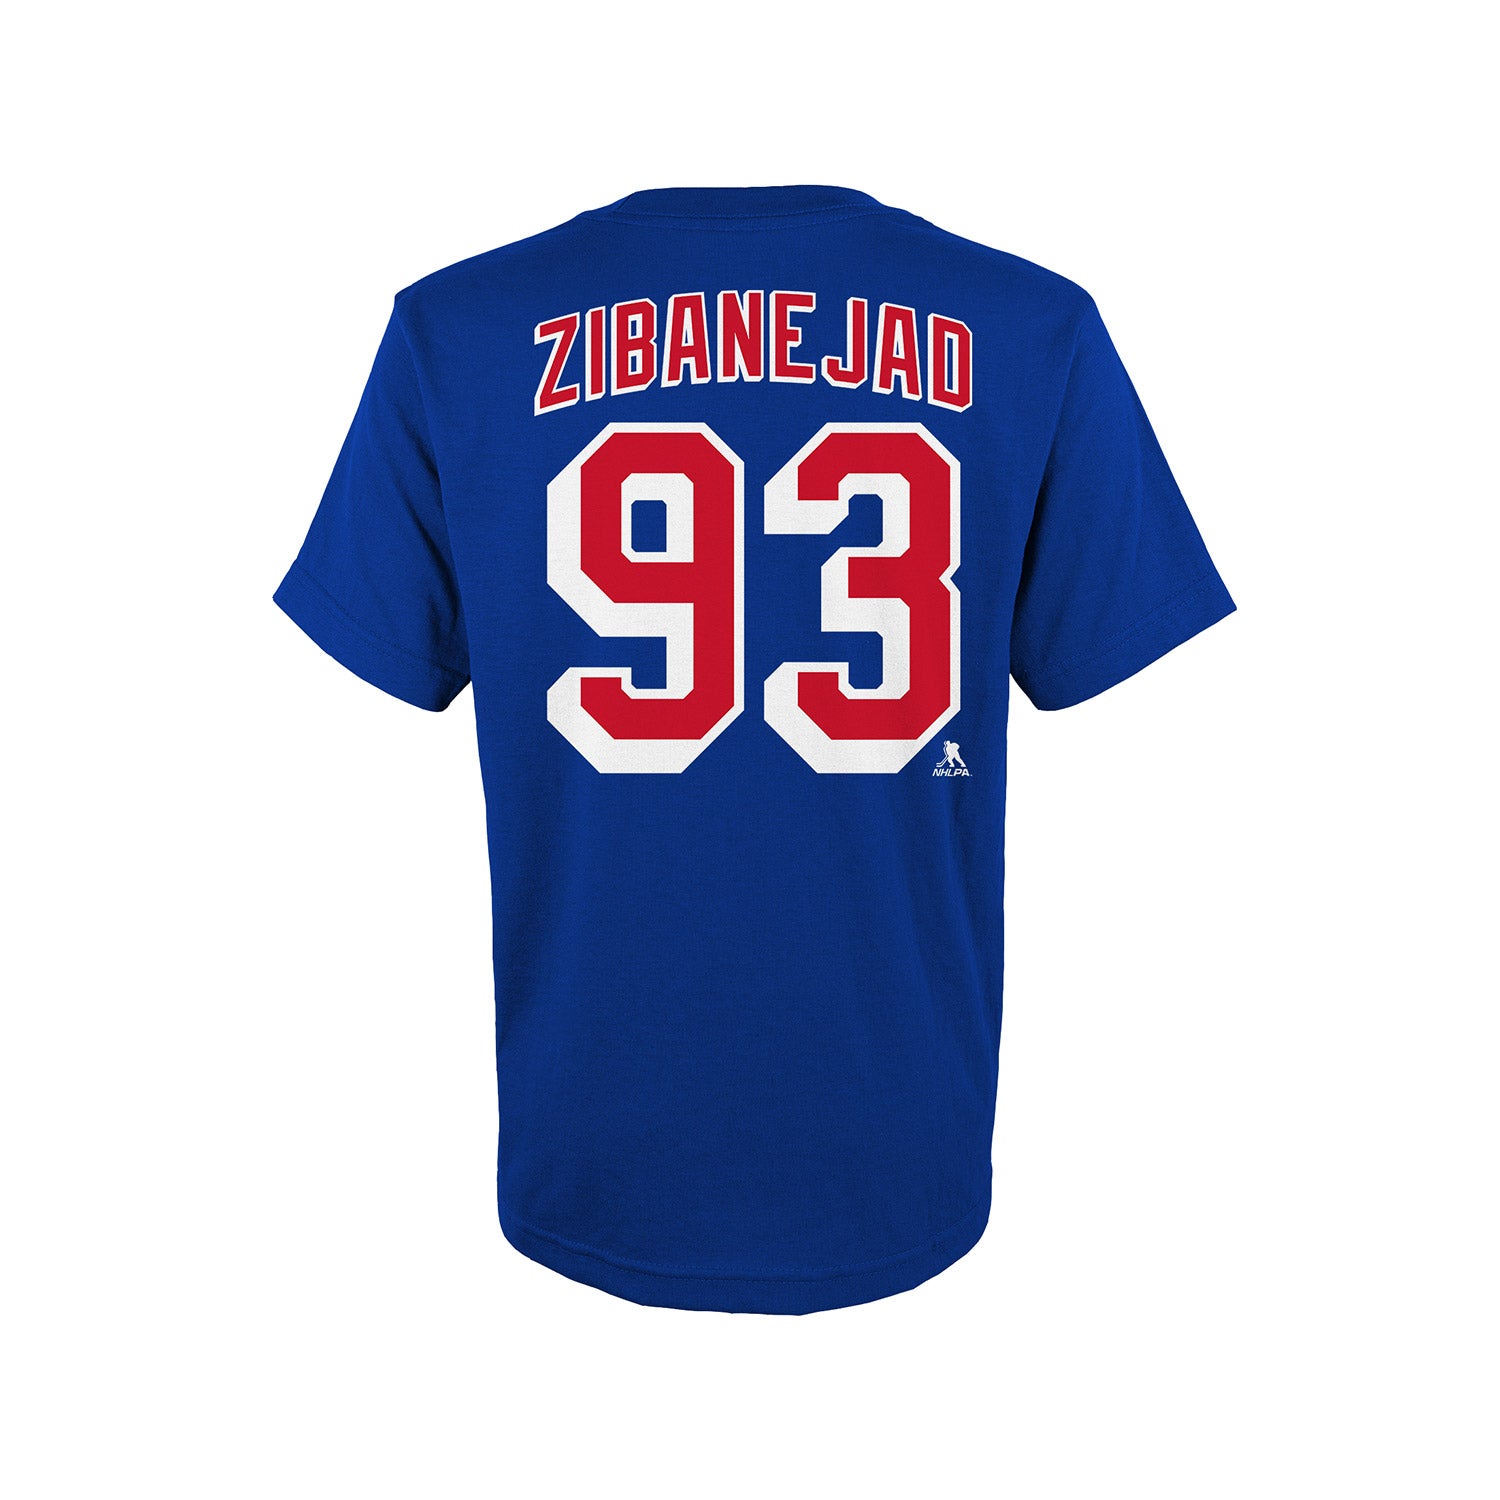 Youth Rangers Mika Zibanejad Name & Number Tee In Blue, Red & White - Back View